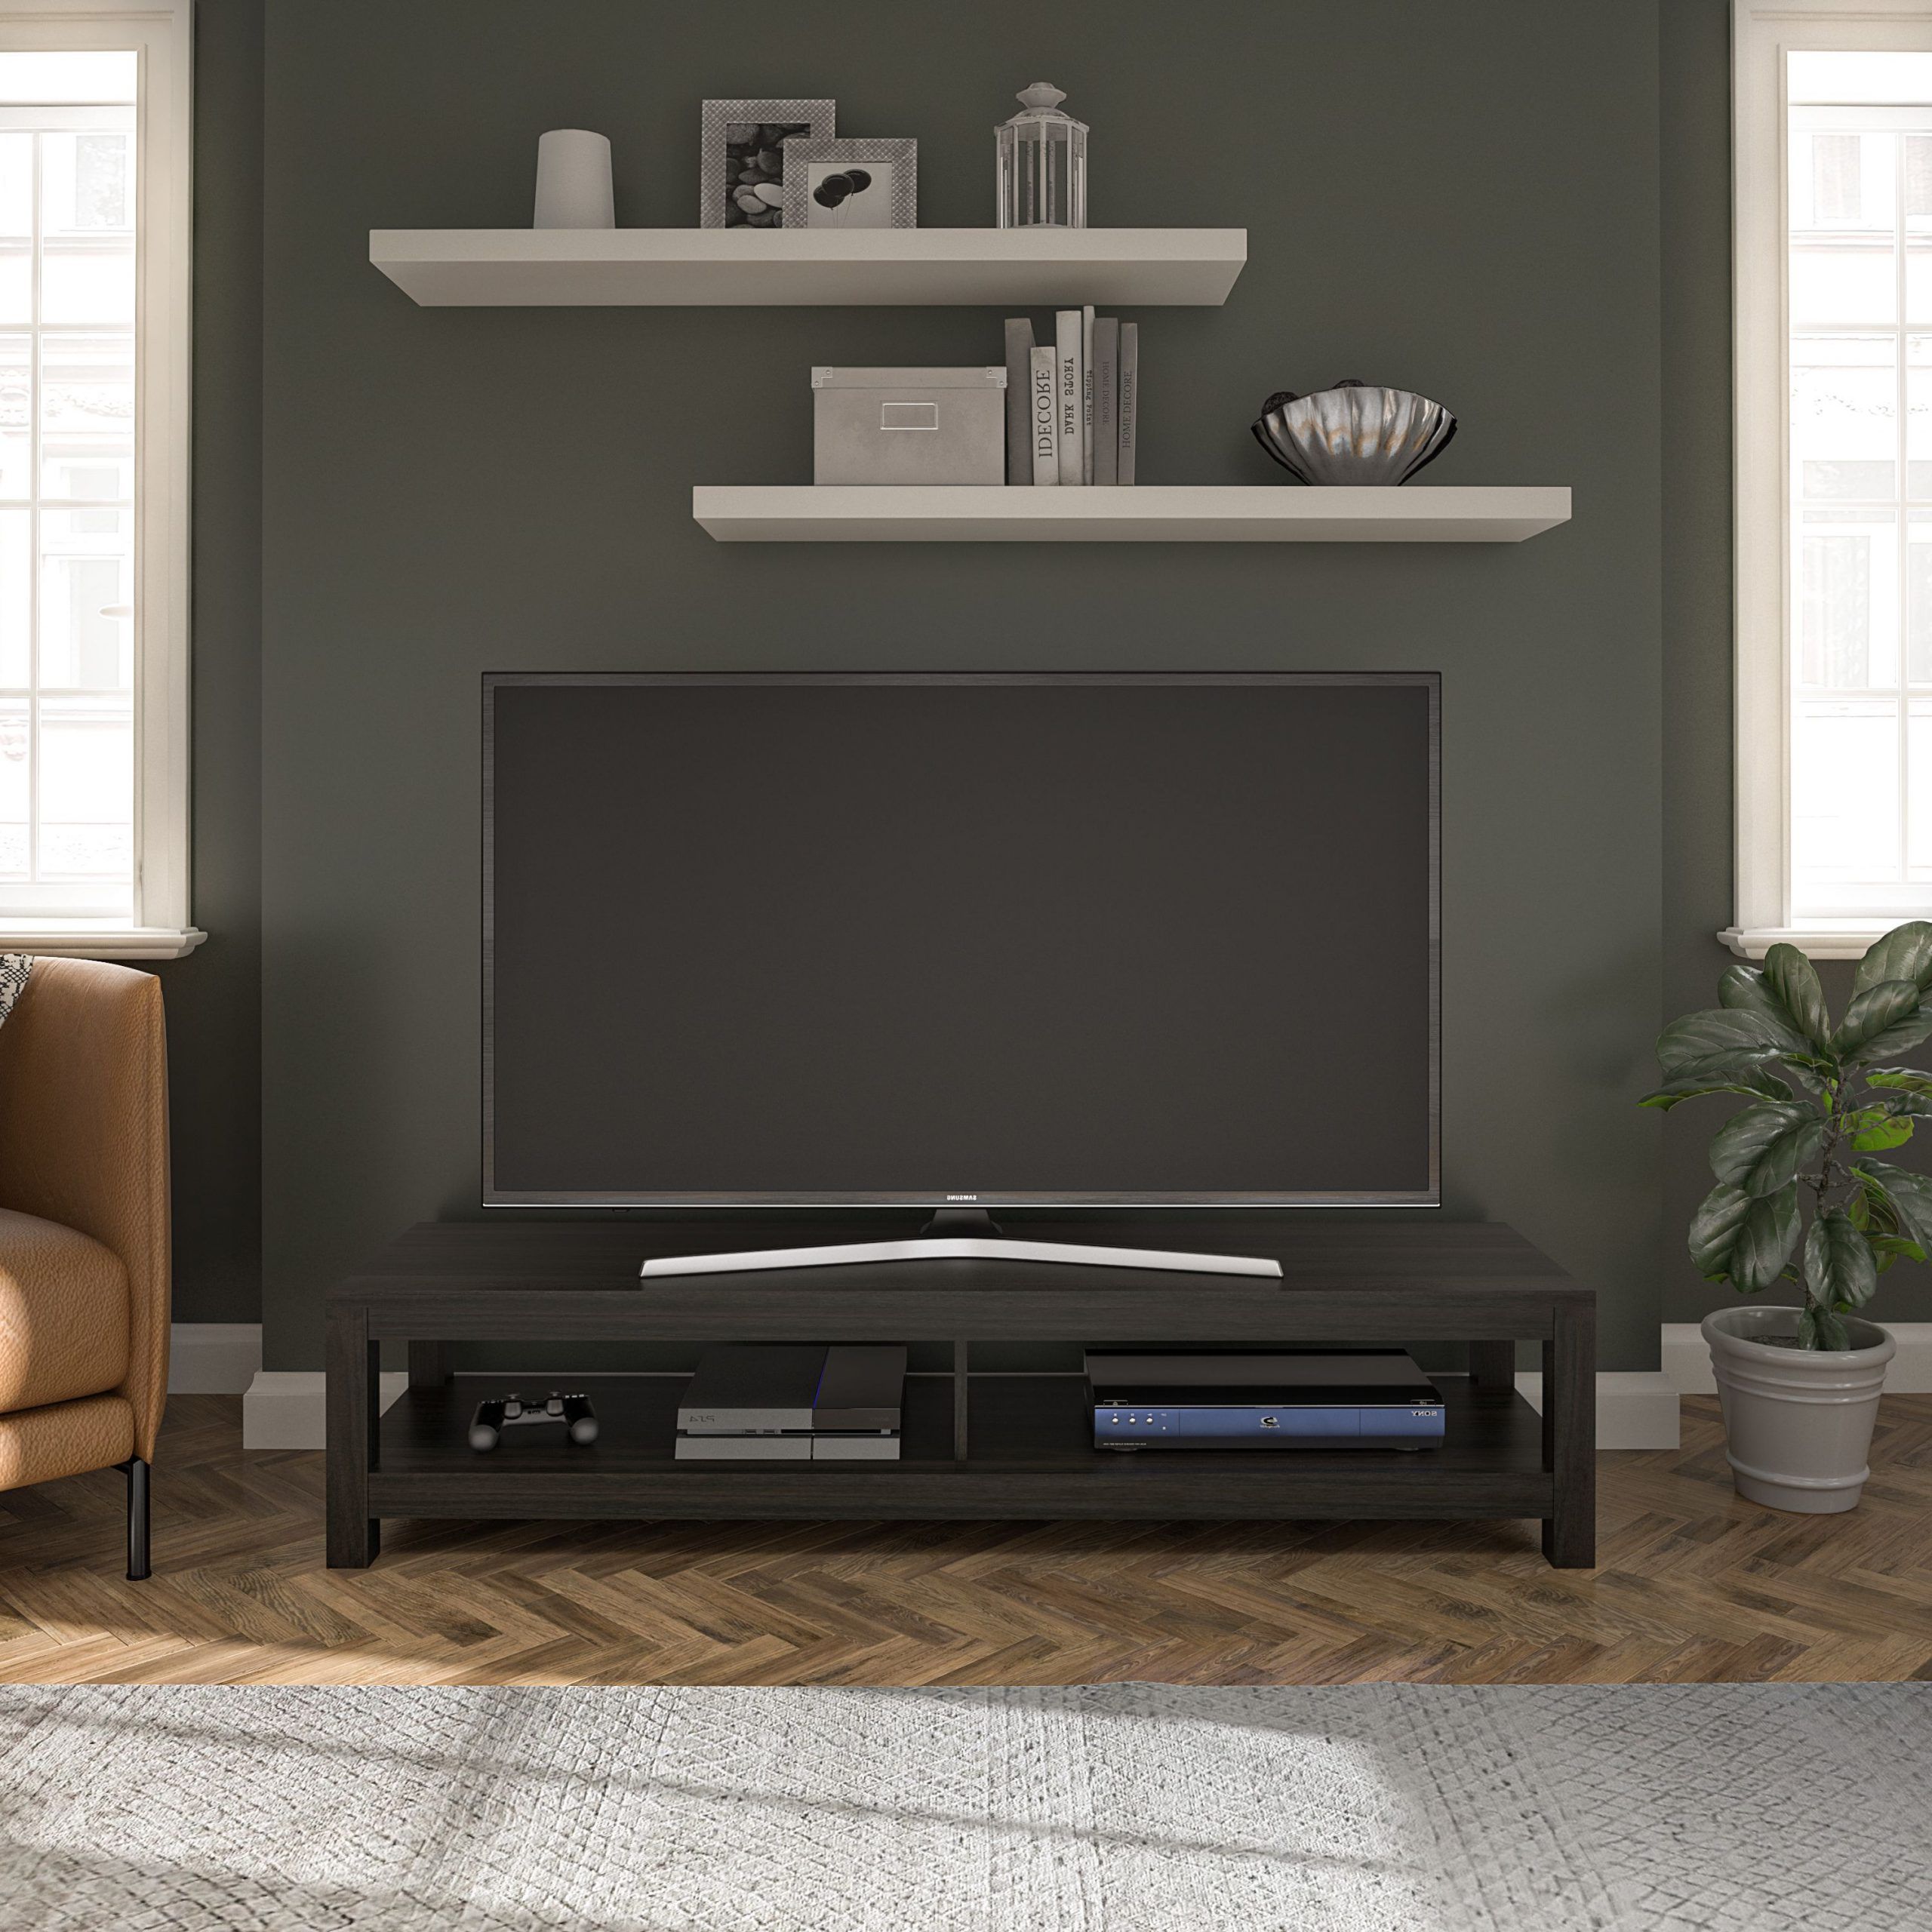 Mainstays Easy Assembly Tv Stand For Tv's Up To 65 With Regard To Wolla Tv Stands For Tvs Up To 65" (View 8 of 20)